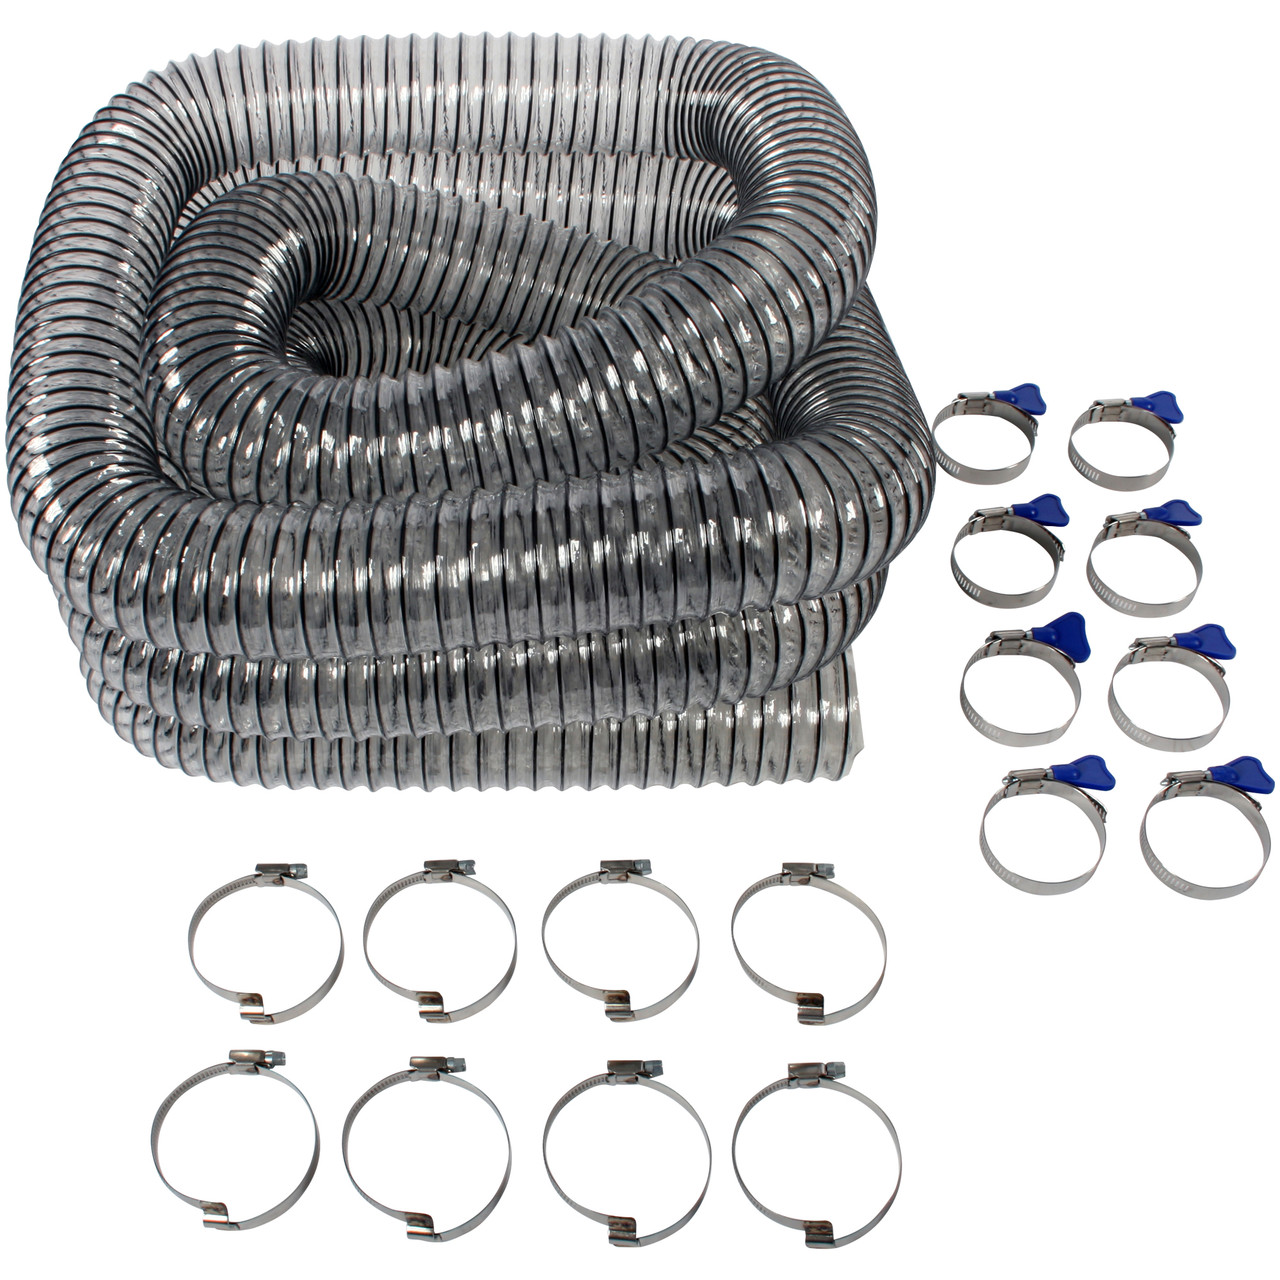 2.5 Inch (63.5mm) x 20 Ft. (6.1m) Polyurethane Ducting Hose with Bridge  and Key Clamps Cen-Tec Systems